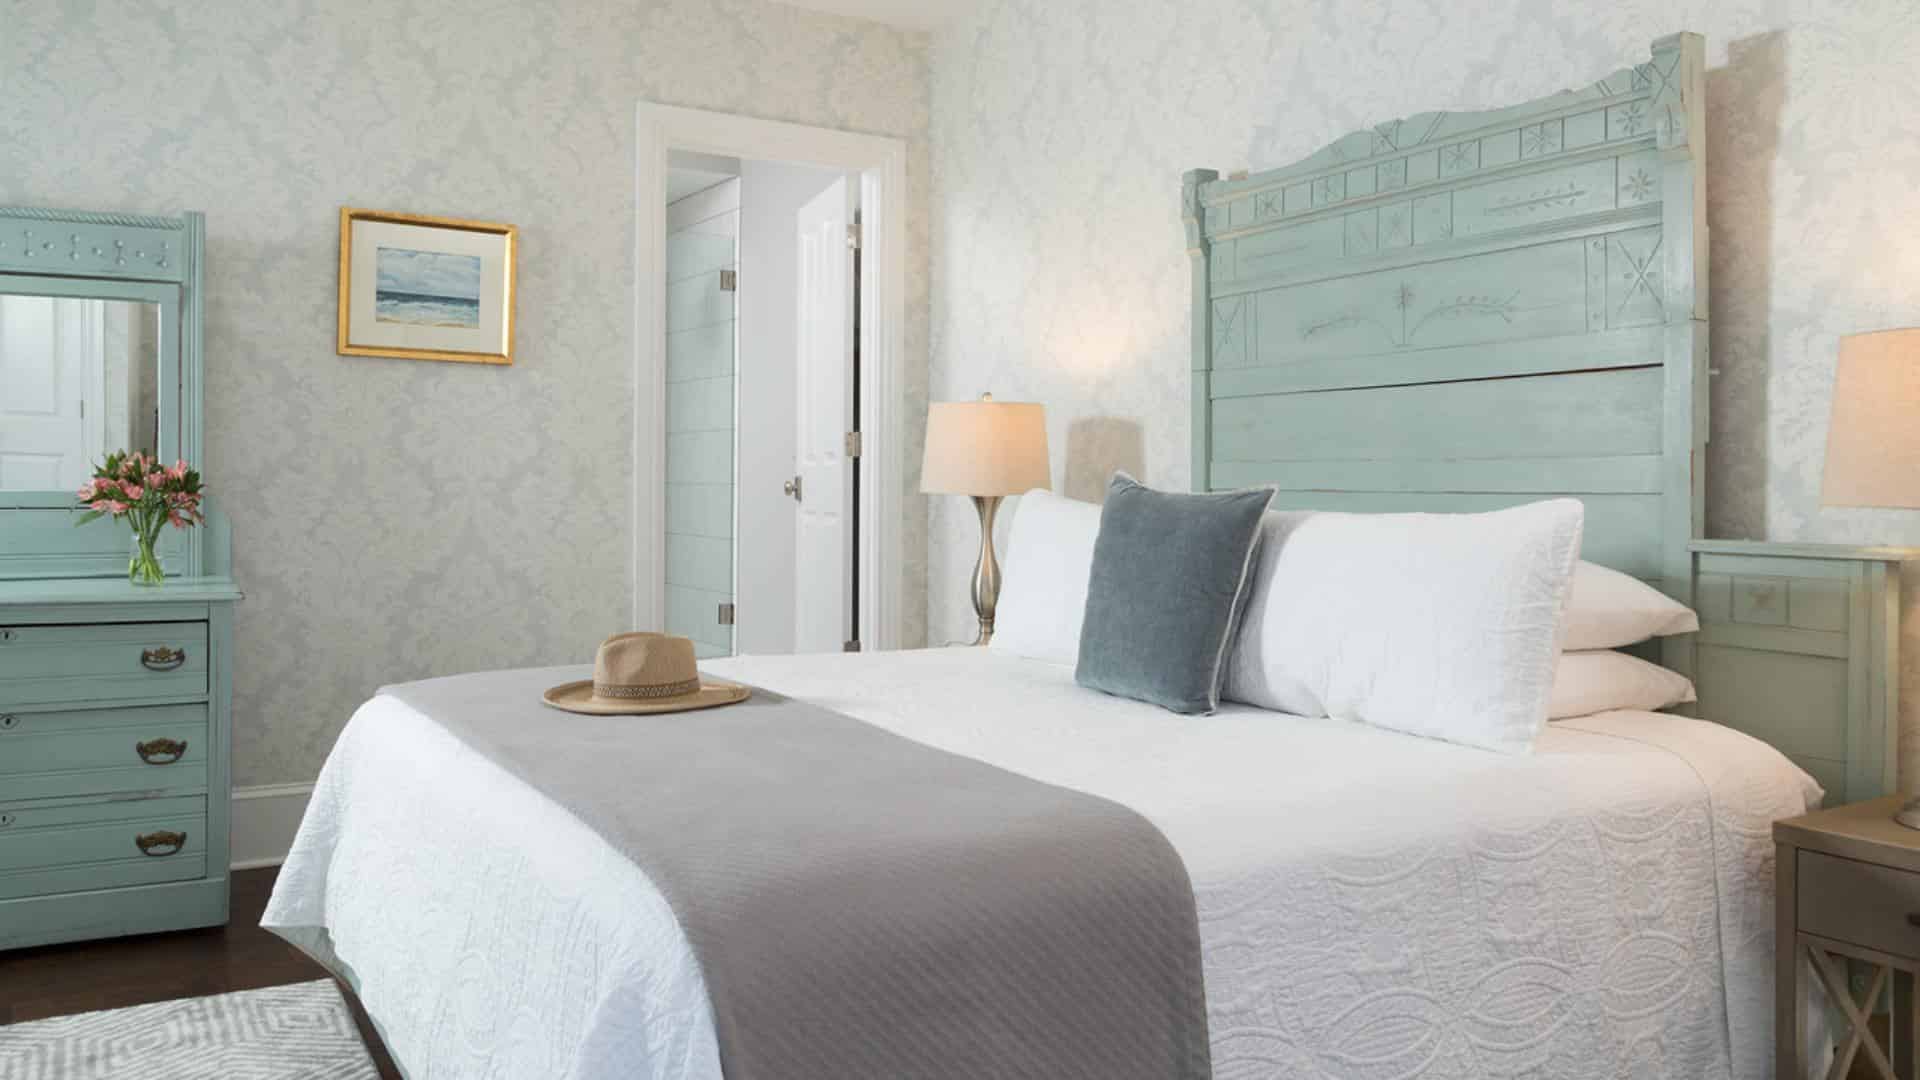 Bedroom with large ornate seafoam headboard, matching dresser with mirror, white bedding, gray blanket, hardwood flooring, and light brocade wallpaper